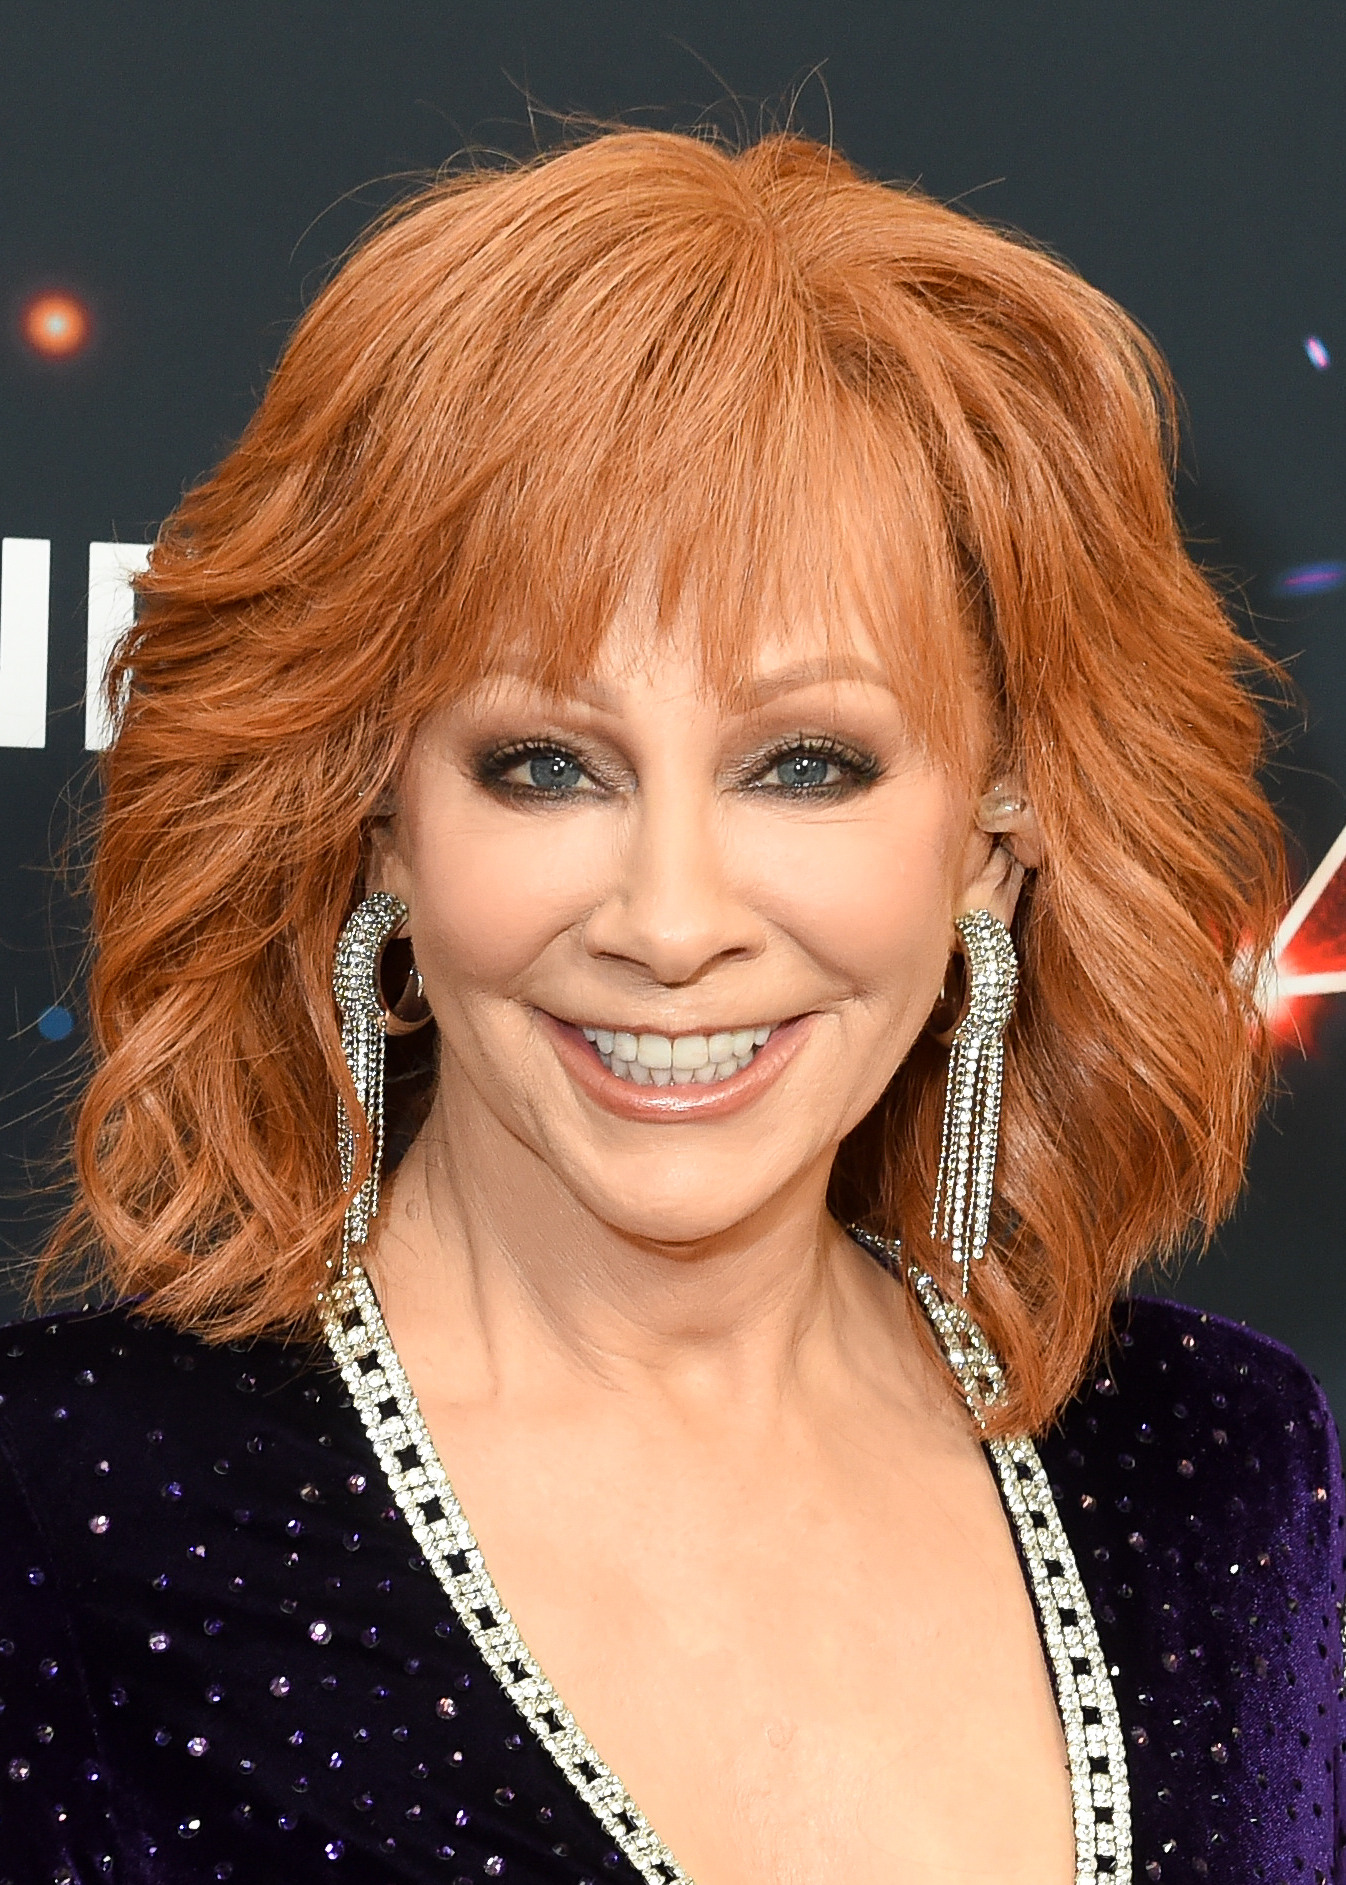 Reba McEntire at the "America's Got Talent" red carpet at the Hotel Dena on September 20, 2023 in Pasadena, California. | Source: Getty Images